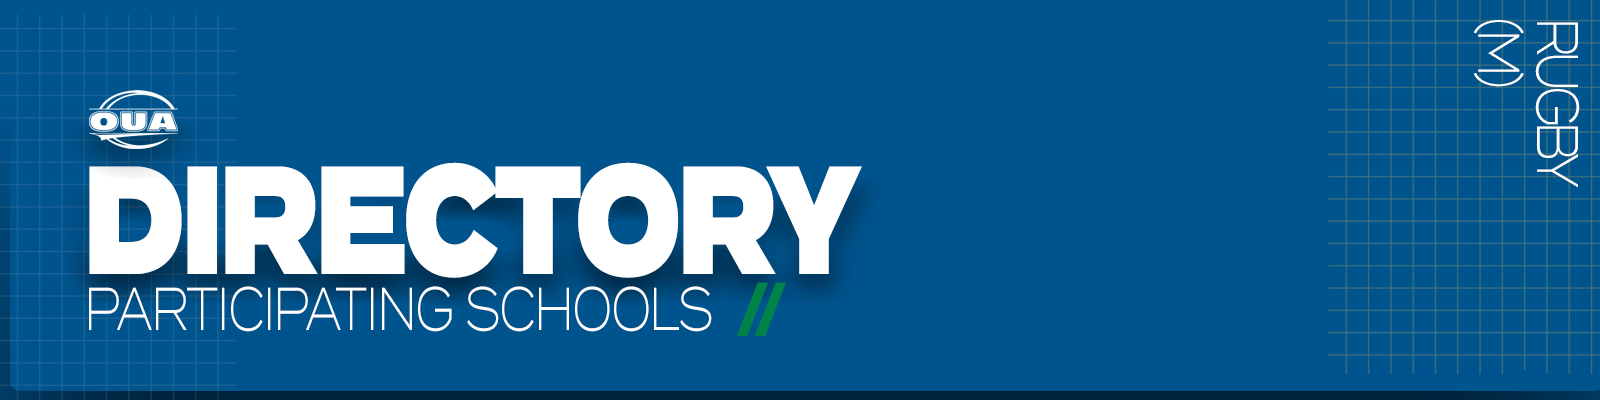 Predominantly blue graphic with large white text on the left side that reads 'Directory, Participating Schools' and small white vertical text on the right side that reads 'Rugby M'